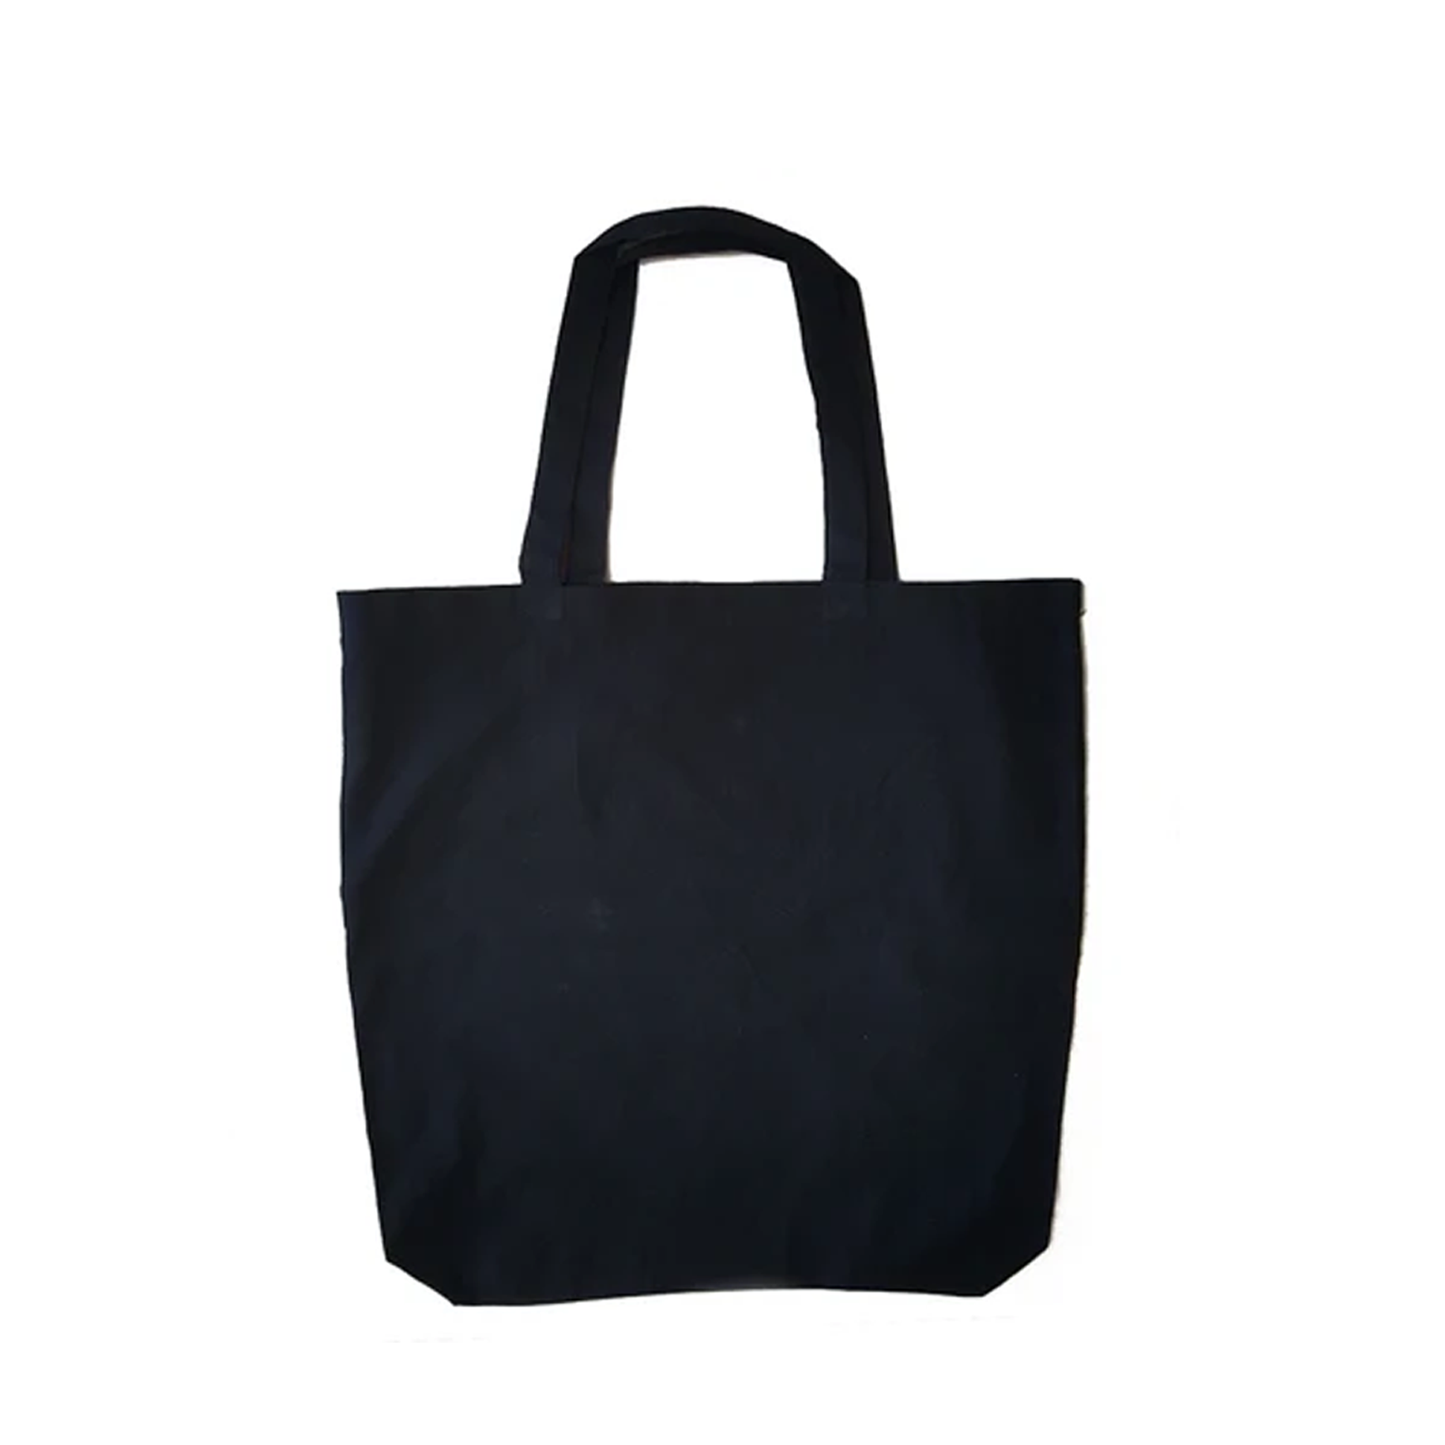 100% cotton black tote bag with 2 straps and bottom gussets